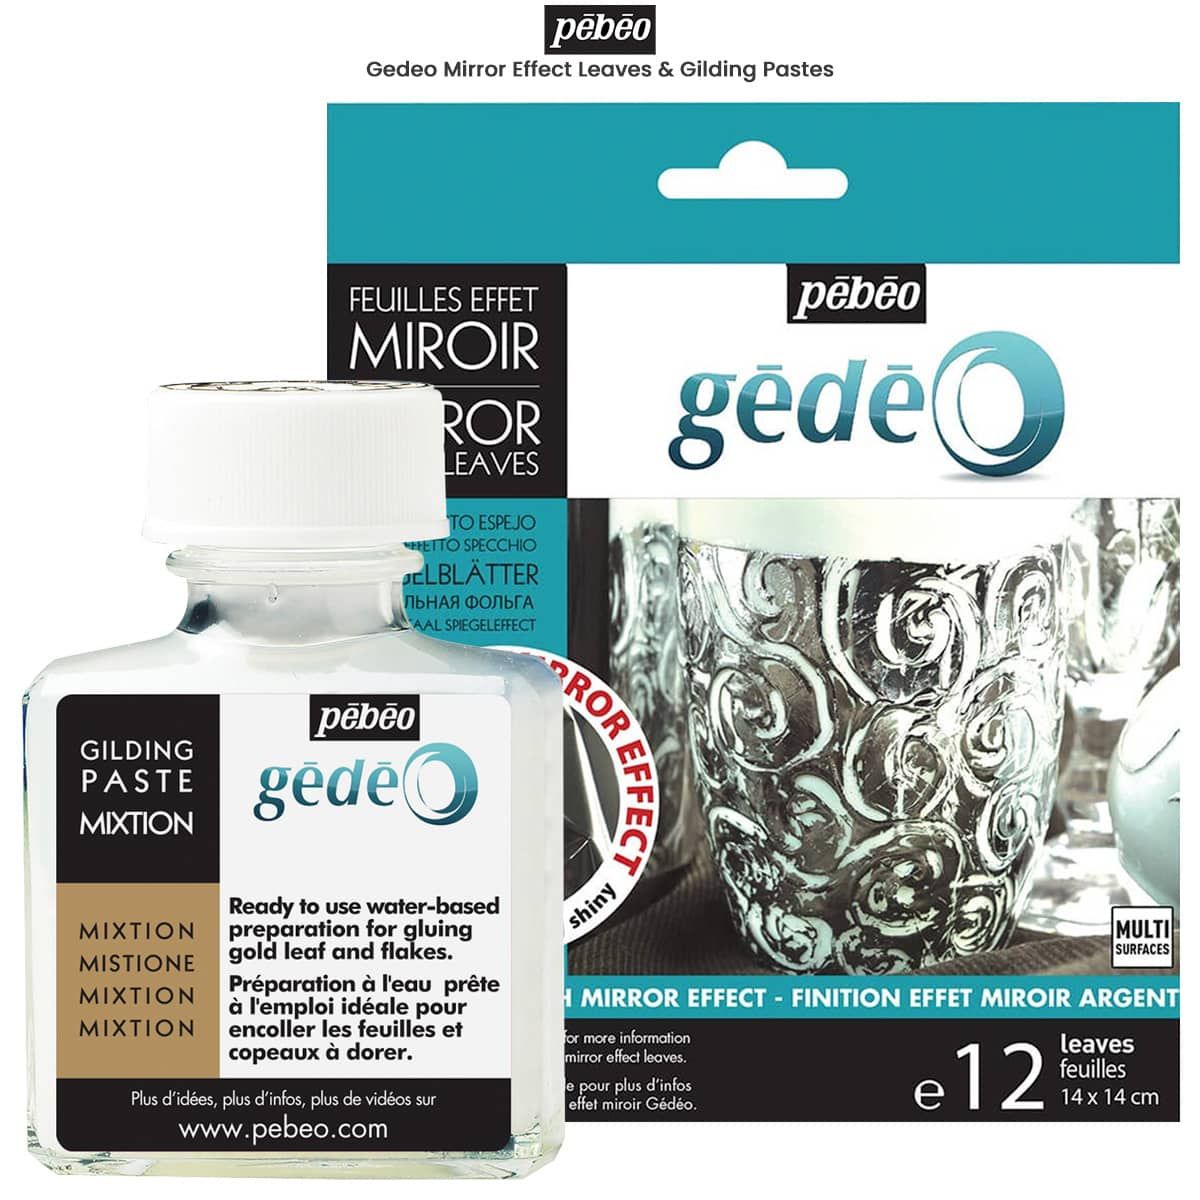 Pebeo Gedeo Mirror Effect Leaves & Gilding Pastes